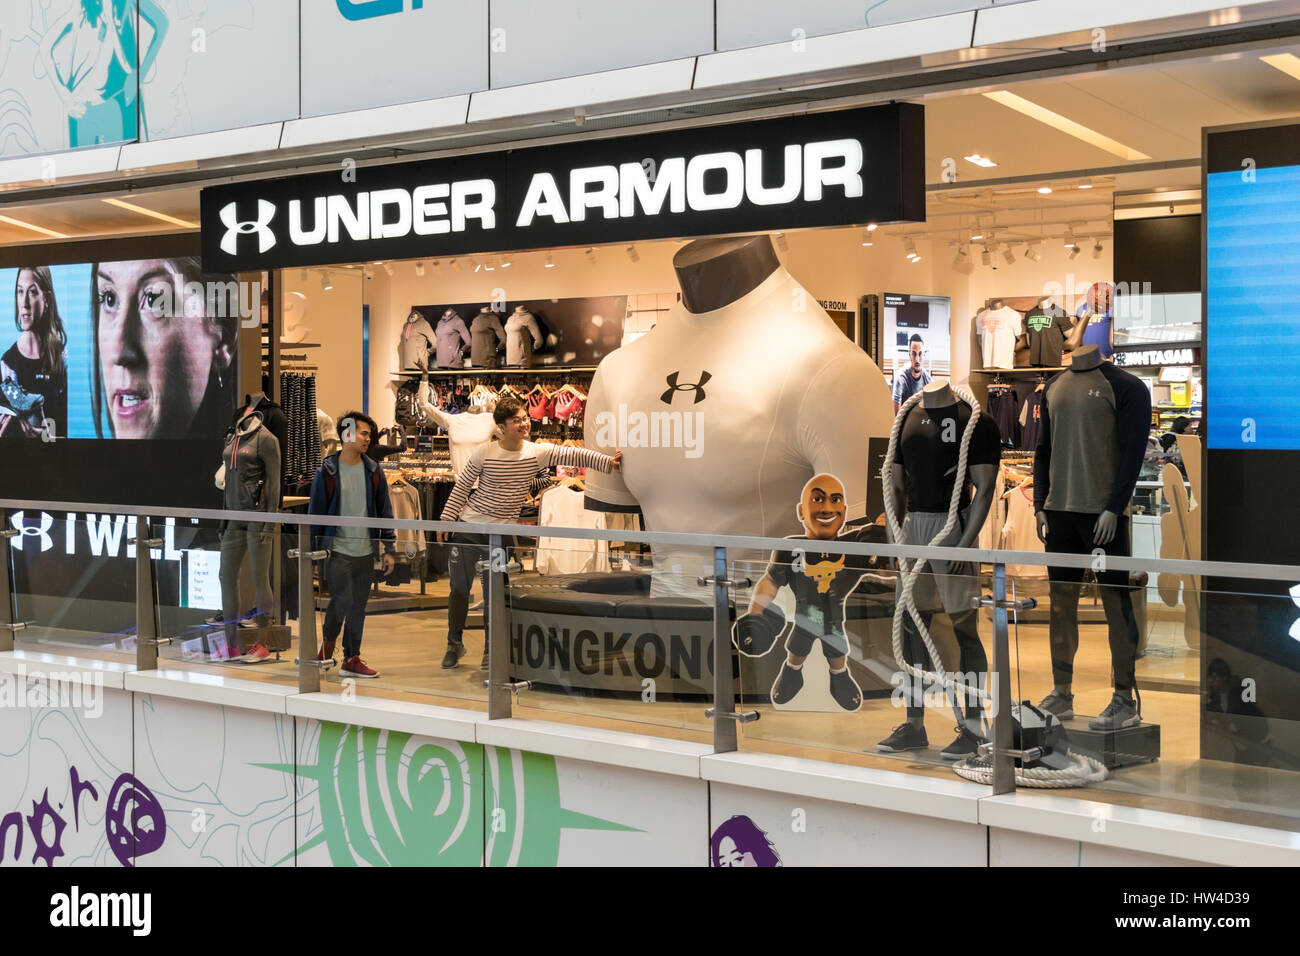 Under armour stock photography images - Alamy